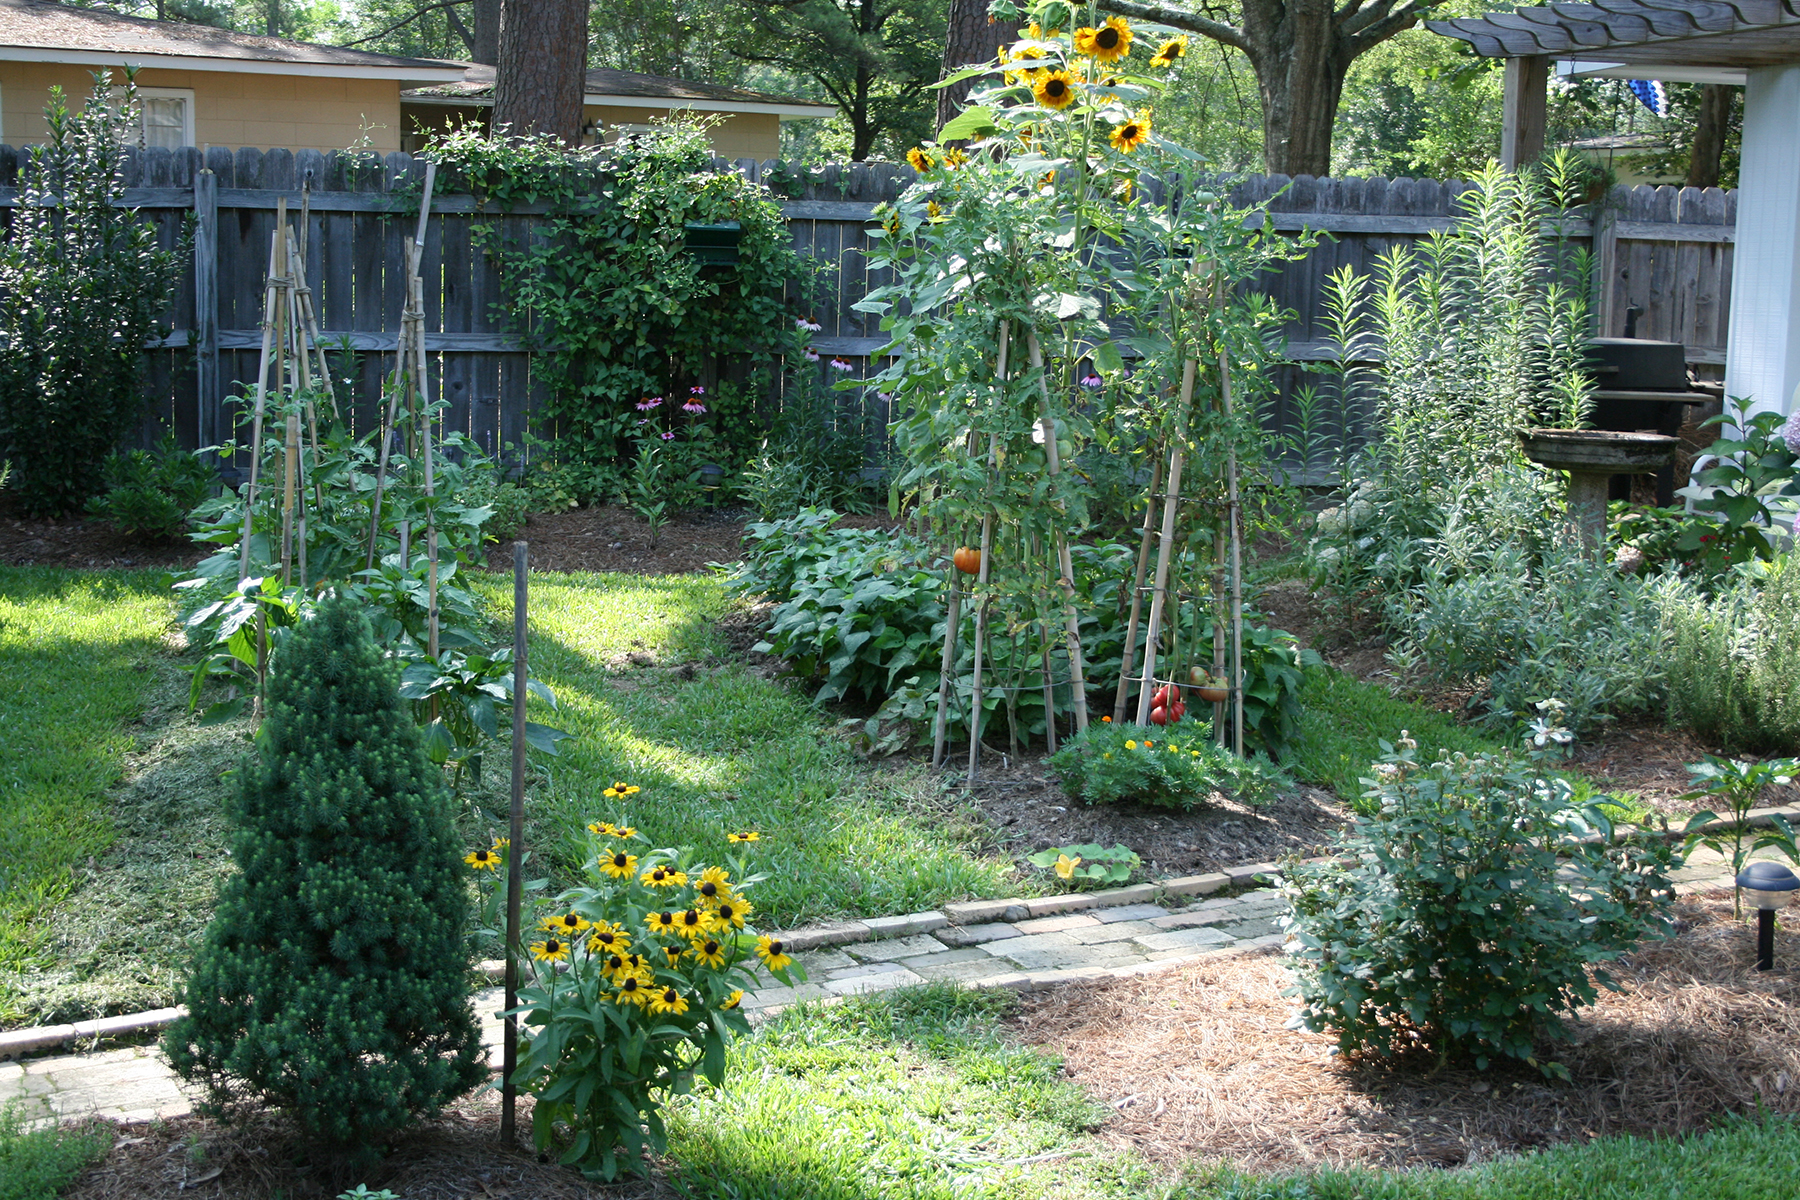 A raised bed vegetable garden with each bed simply mounded towards the middle.